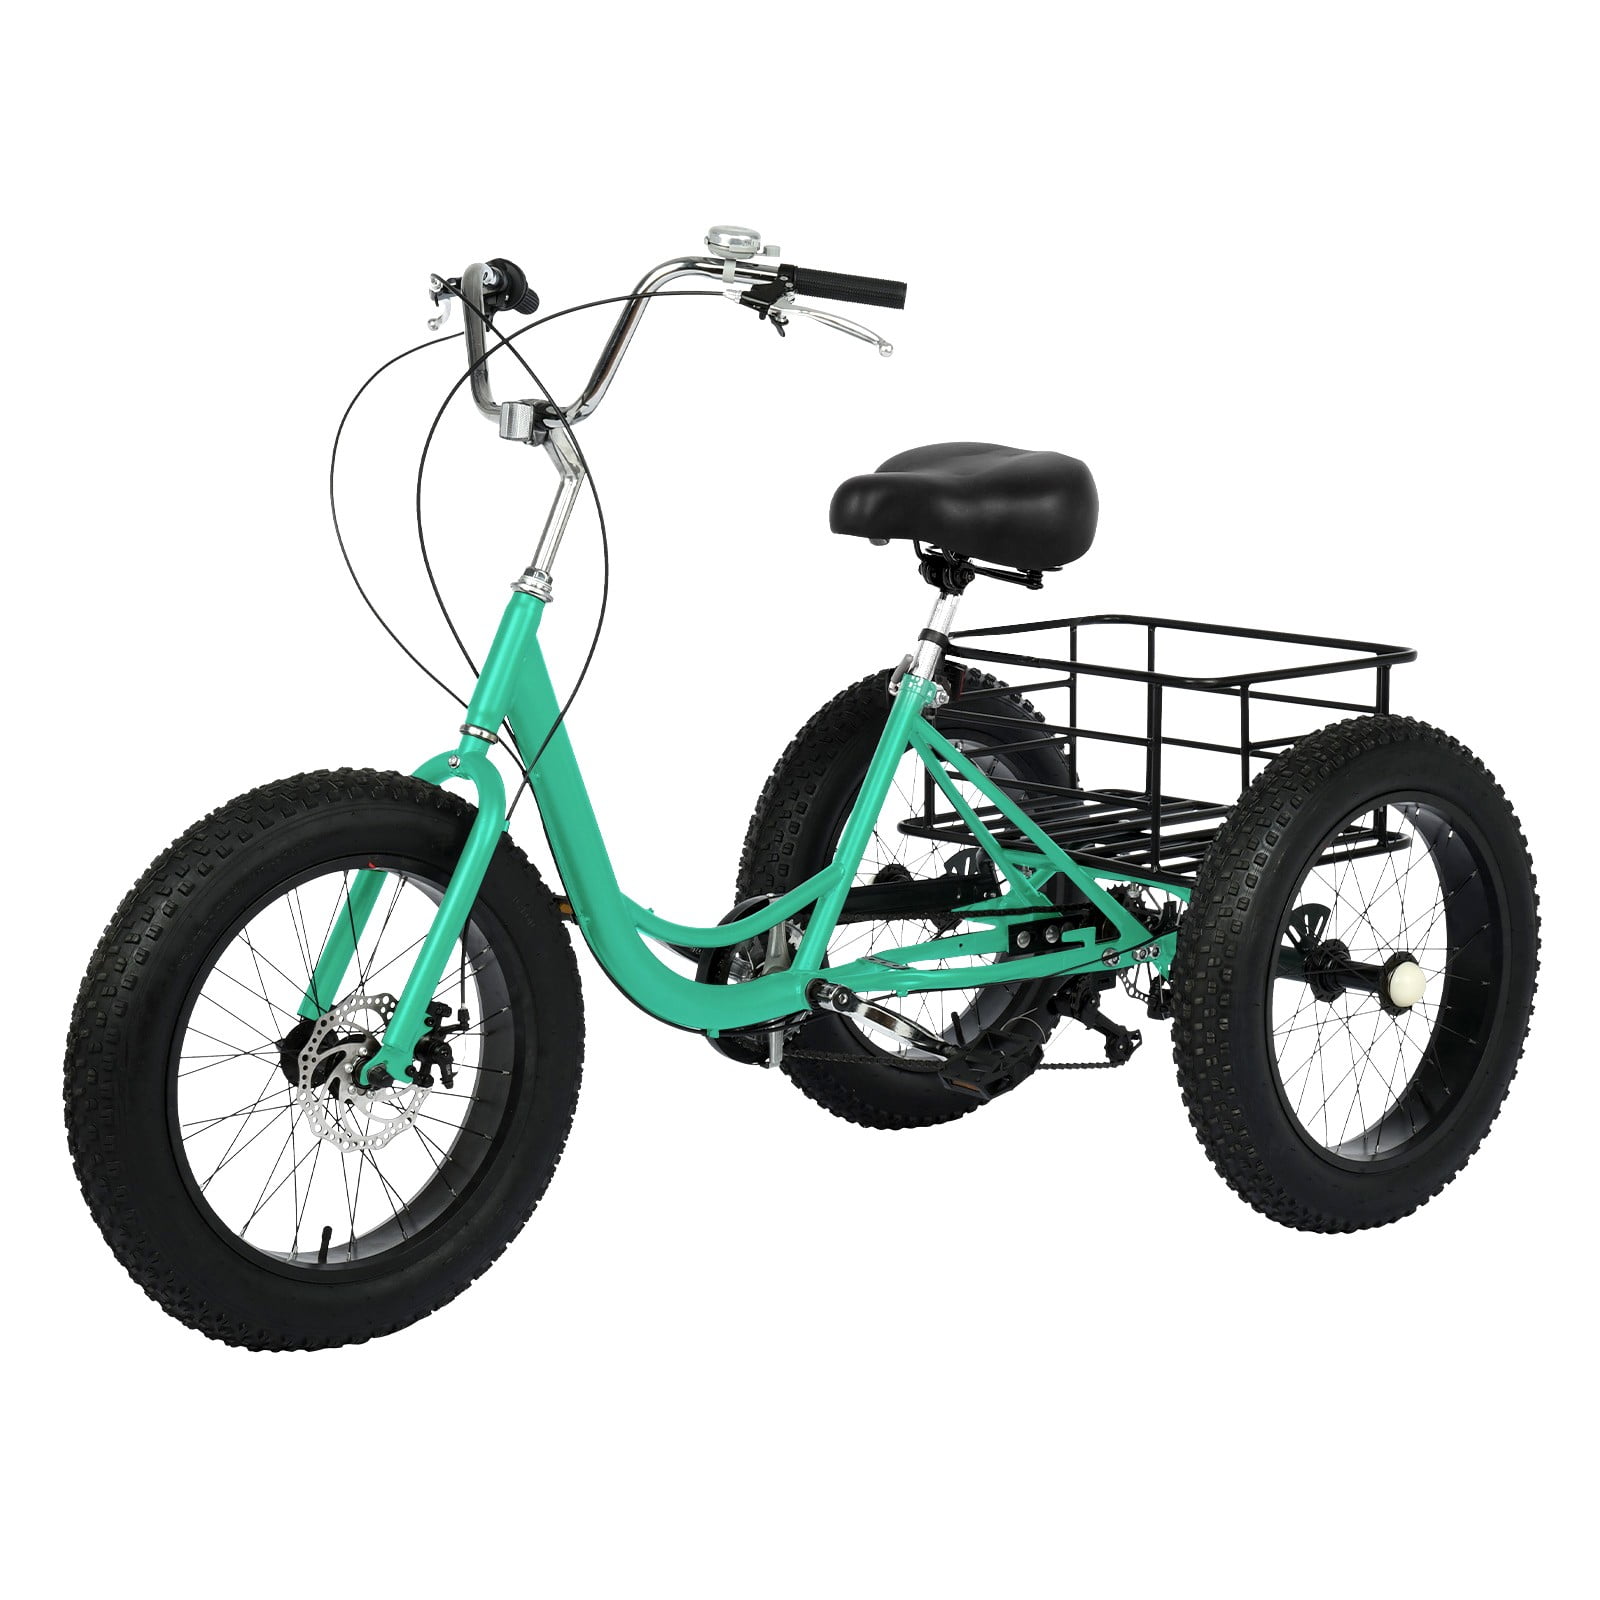 Details about   24" Adult Tricycle Three Wheel Trike Bike Cruiser with Rear Basket Child Seat US 